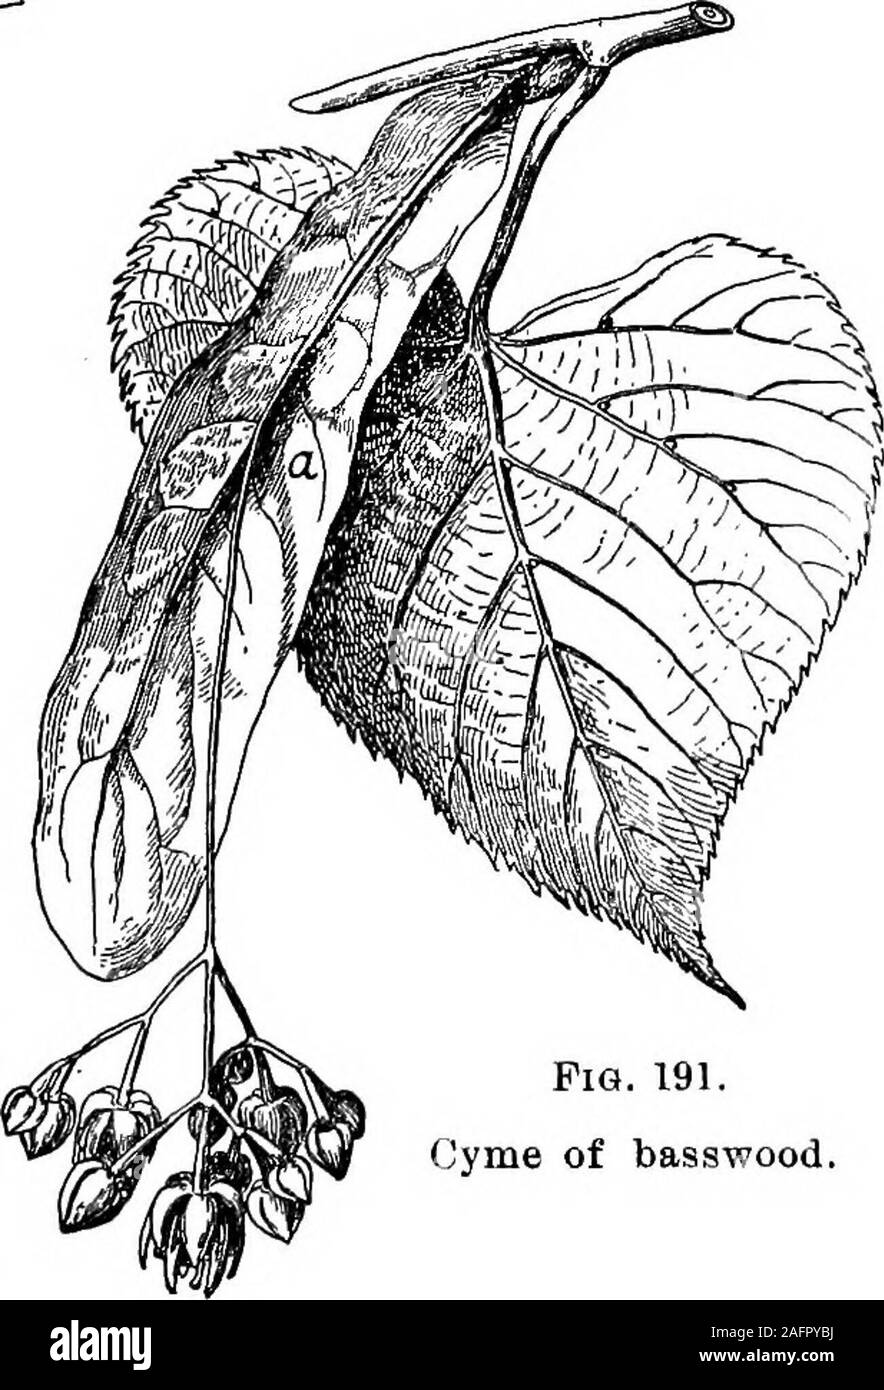 . Lessons with plants. Suggestions for seeing and interpreting some of the common forms of vegetation. nearly simultaneously, and,sometimes the central floweris late; but the delay ofthe central flower is prob-ably the result of thestruggle for existence,for in dense and flat-. PlQ. 191. Cyme of basswood. Fig. 190.Kaoemose panicle of buckwheat. topped clusters the out-ermost flowers musthave the greatest ad-vantage. This suppres-sion or delay of theinside flowers often goes so far that the cluster is said to be cor-ymbose-cymose. 224. If the cymes were much branched, orcompound, then the outer Stock Photo